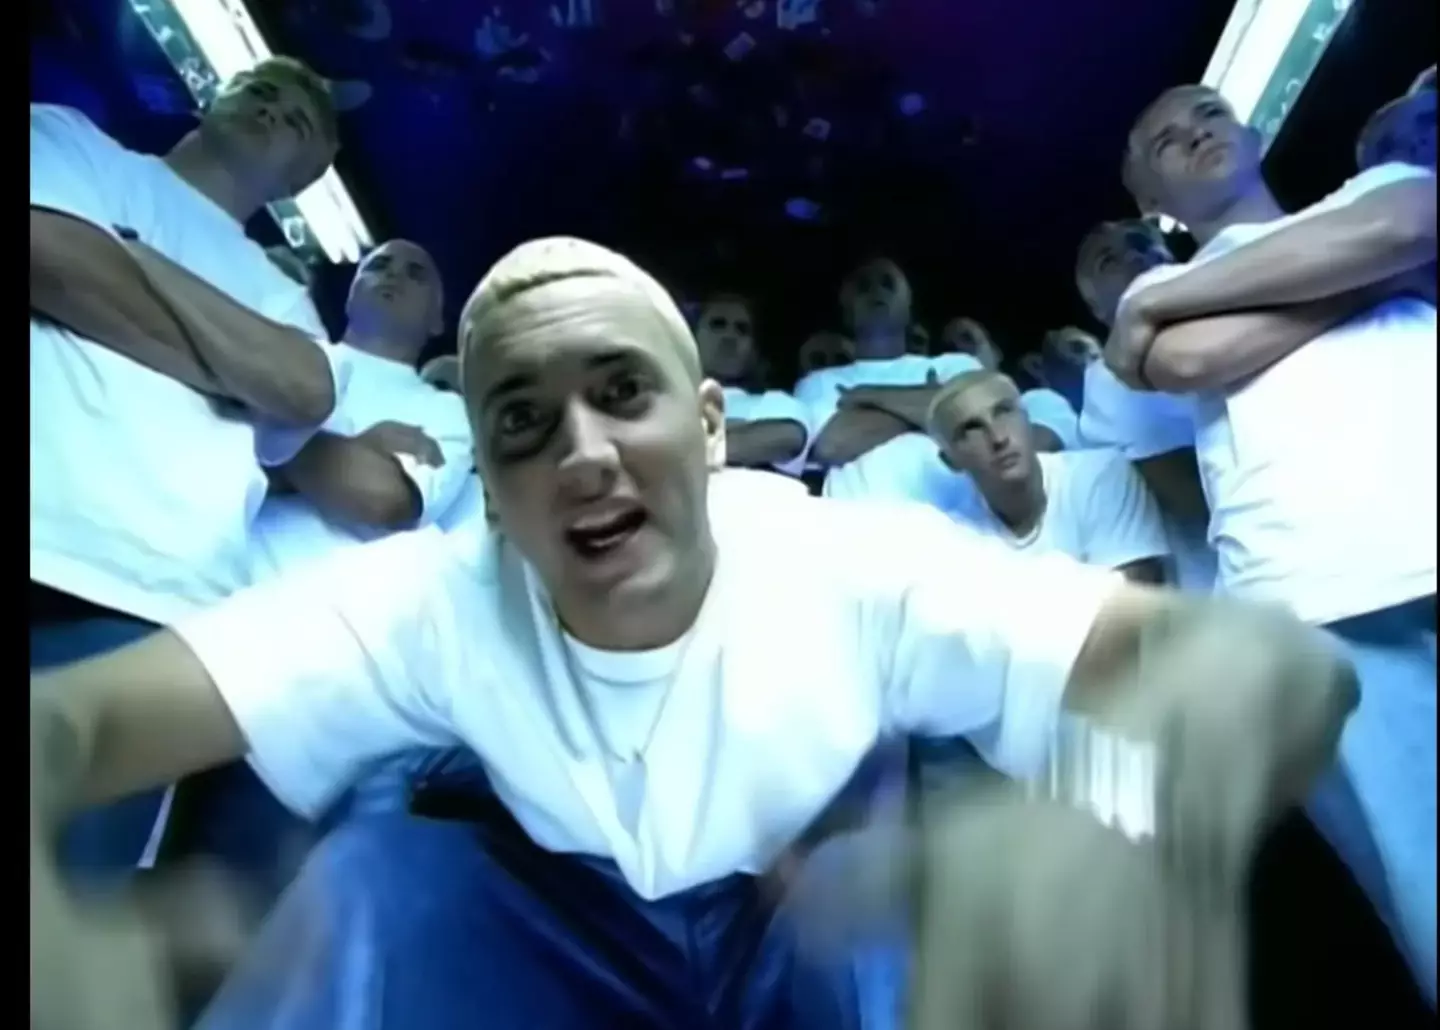 Rocking black tees instead of white, Eminem is surrounded with his imitators in a shout out to the old video. (Eminem/YouTube)